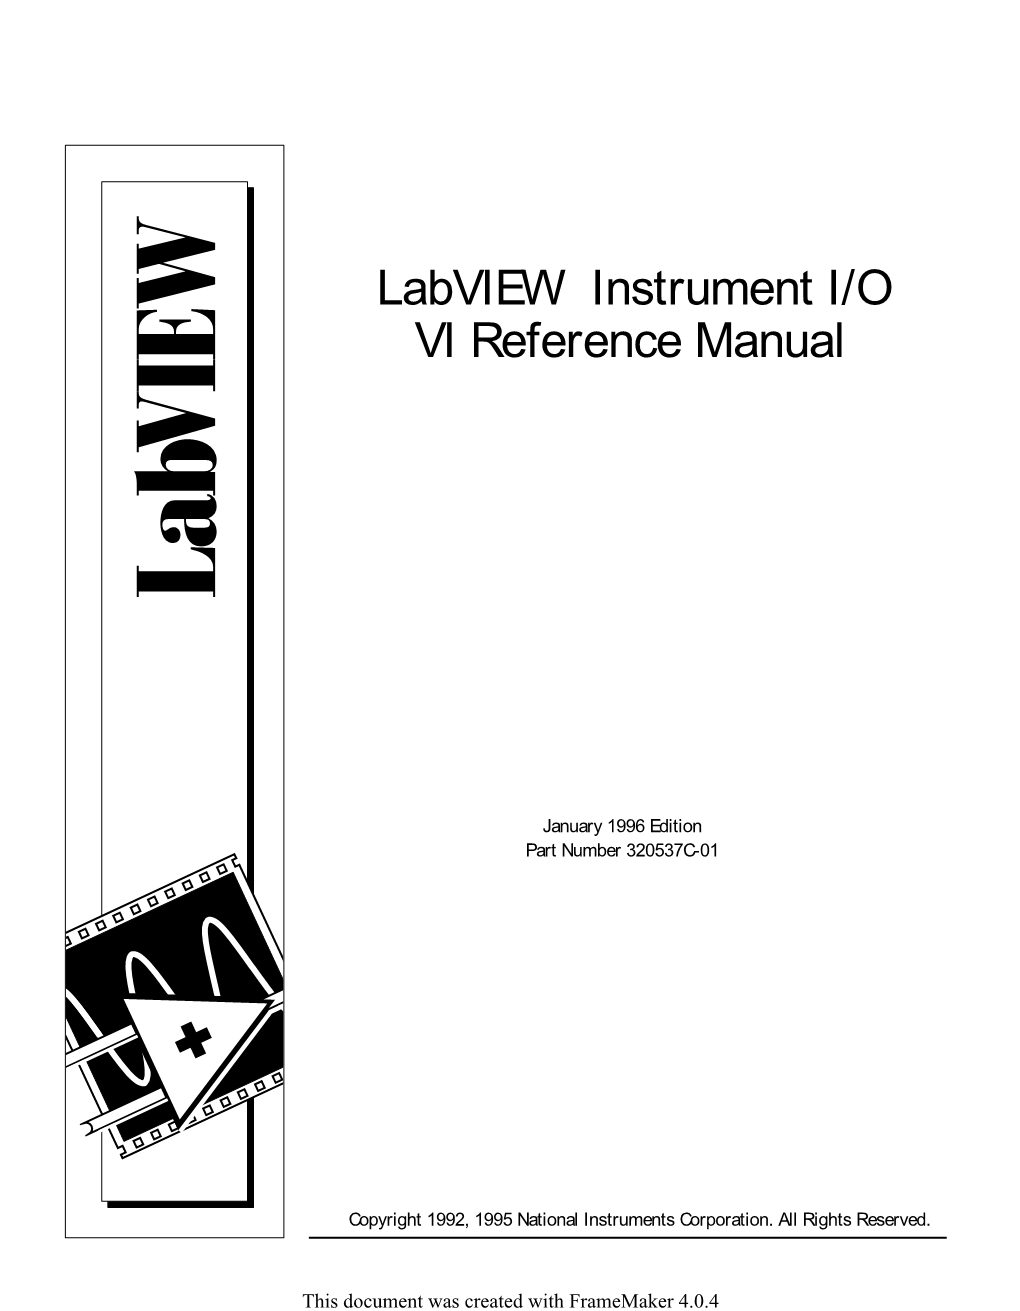 Labview Instrument I/O VI Reference Manual